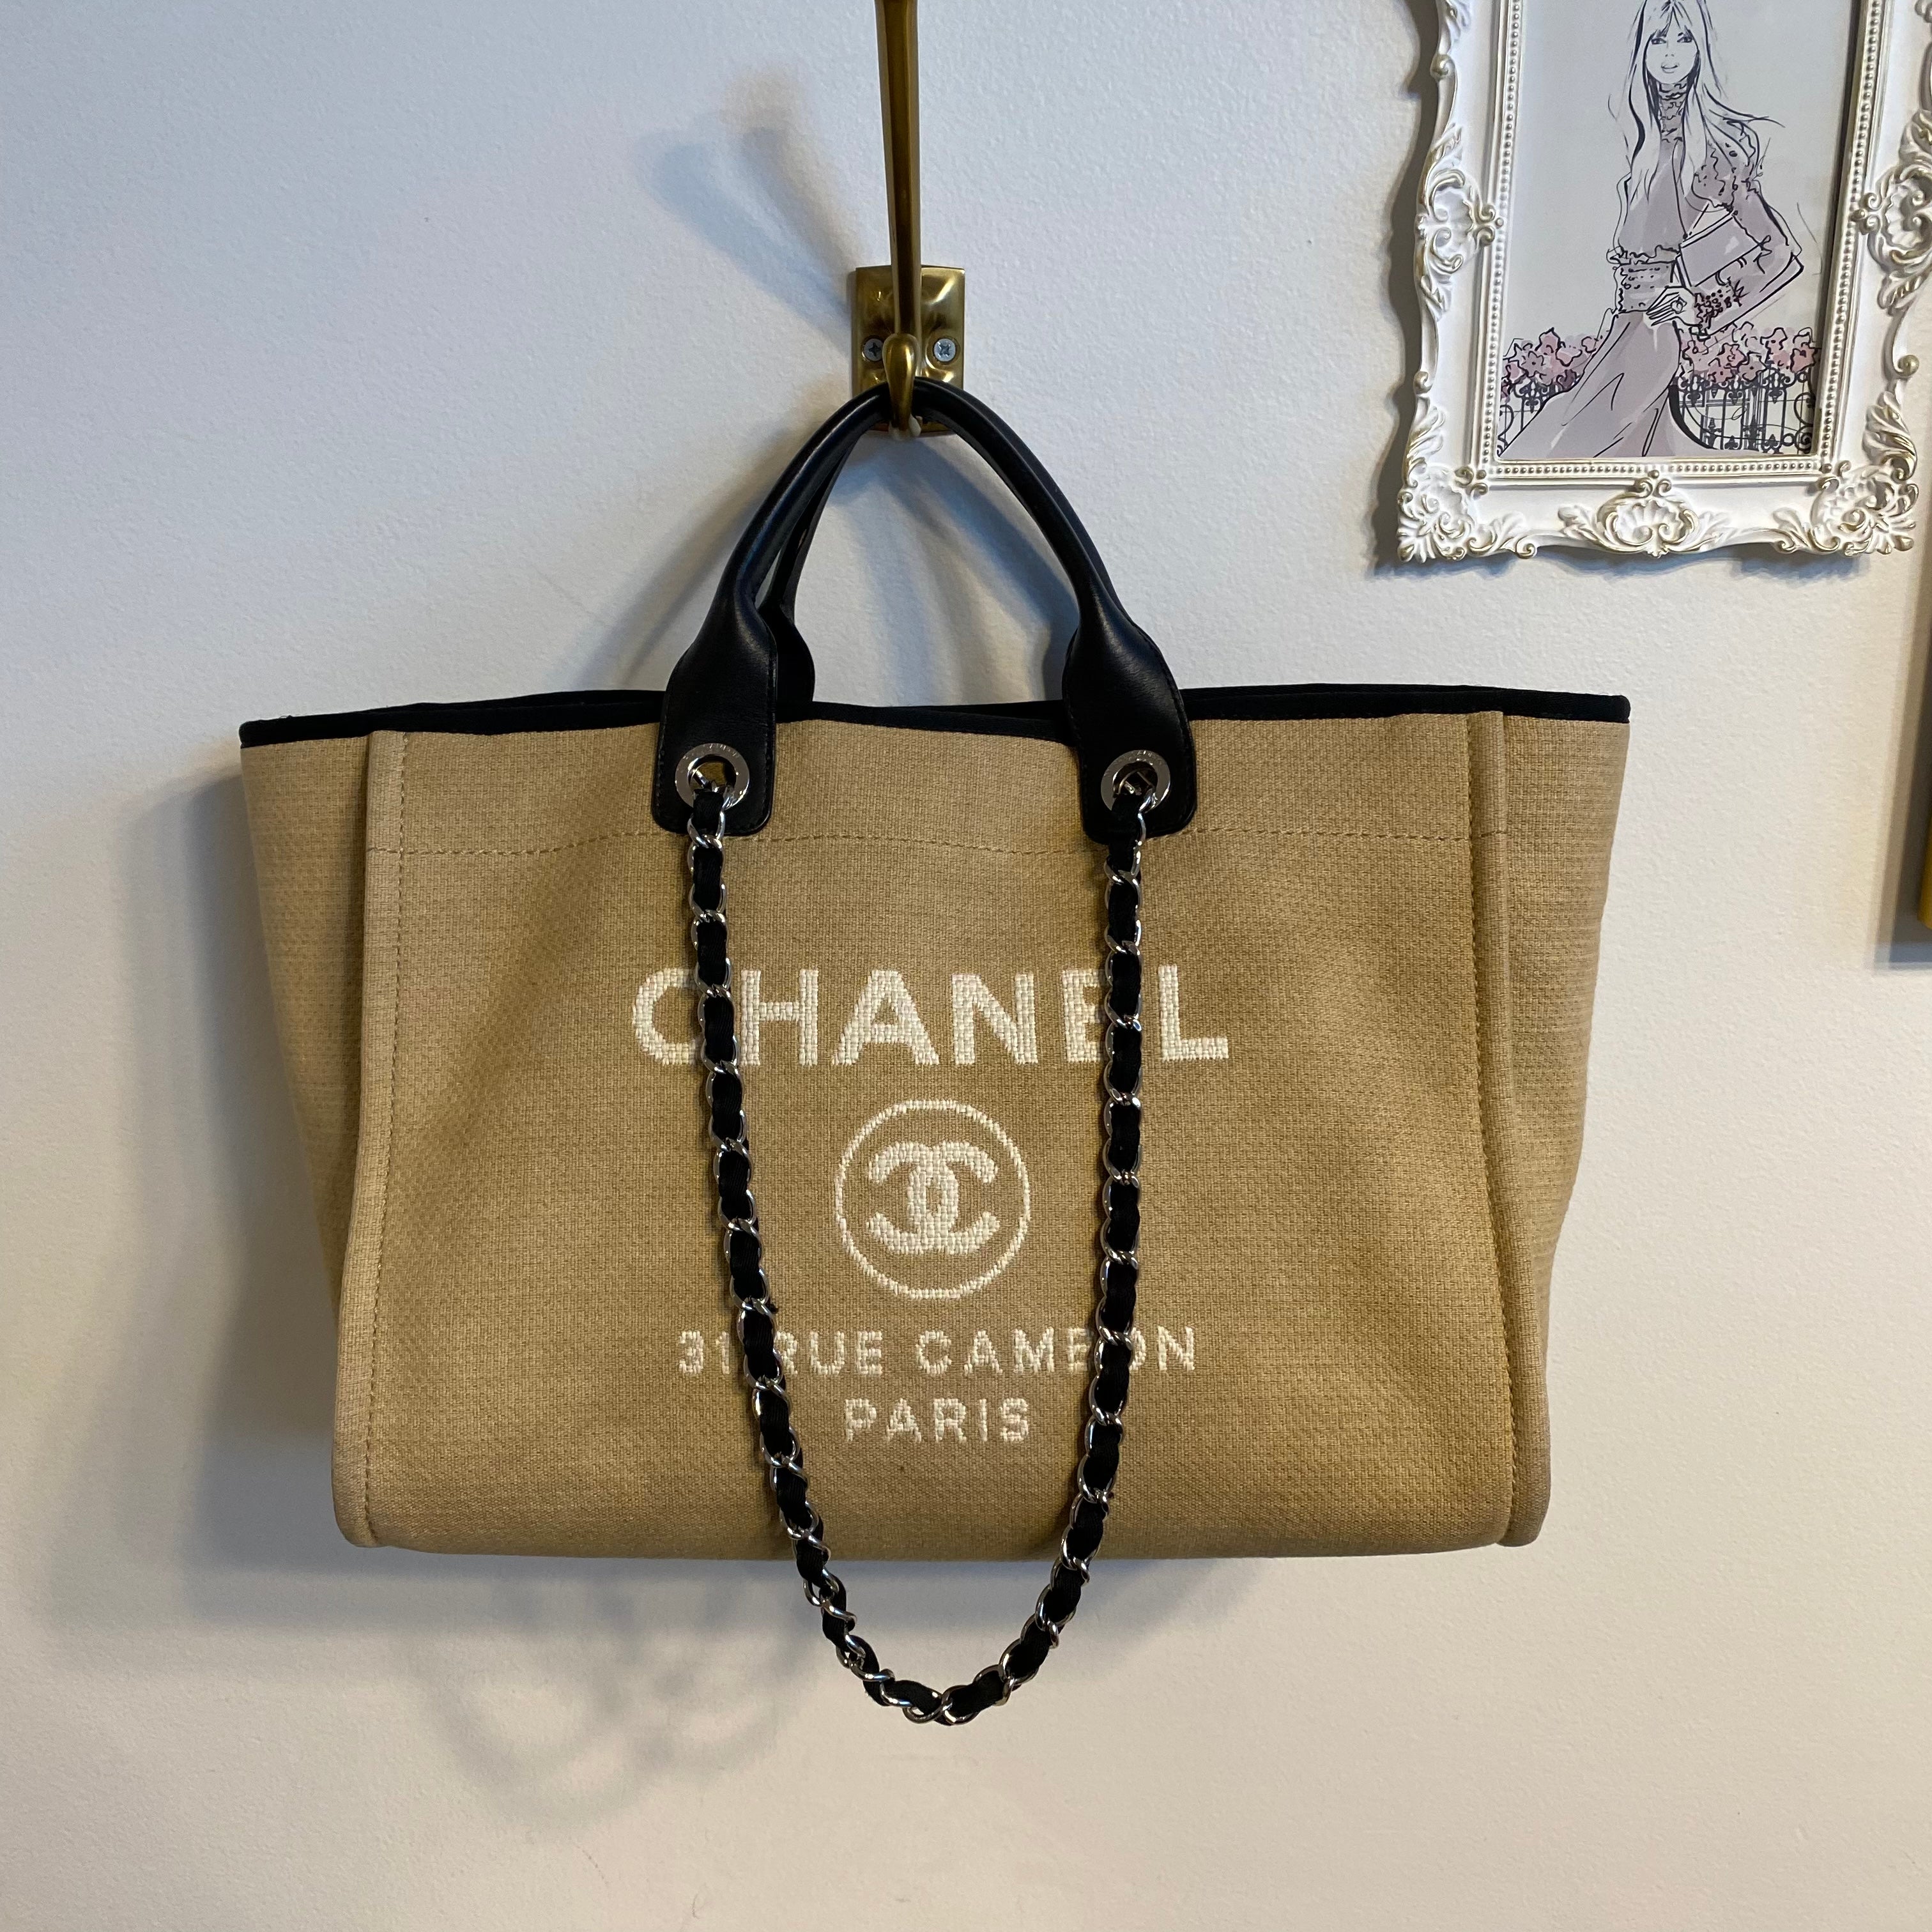 CHANEL Large Peace Cat Emoticon Shopping Tote Bag in Silver Nylon  Dearluxe